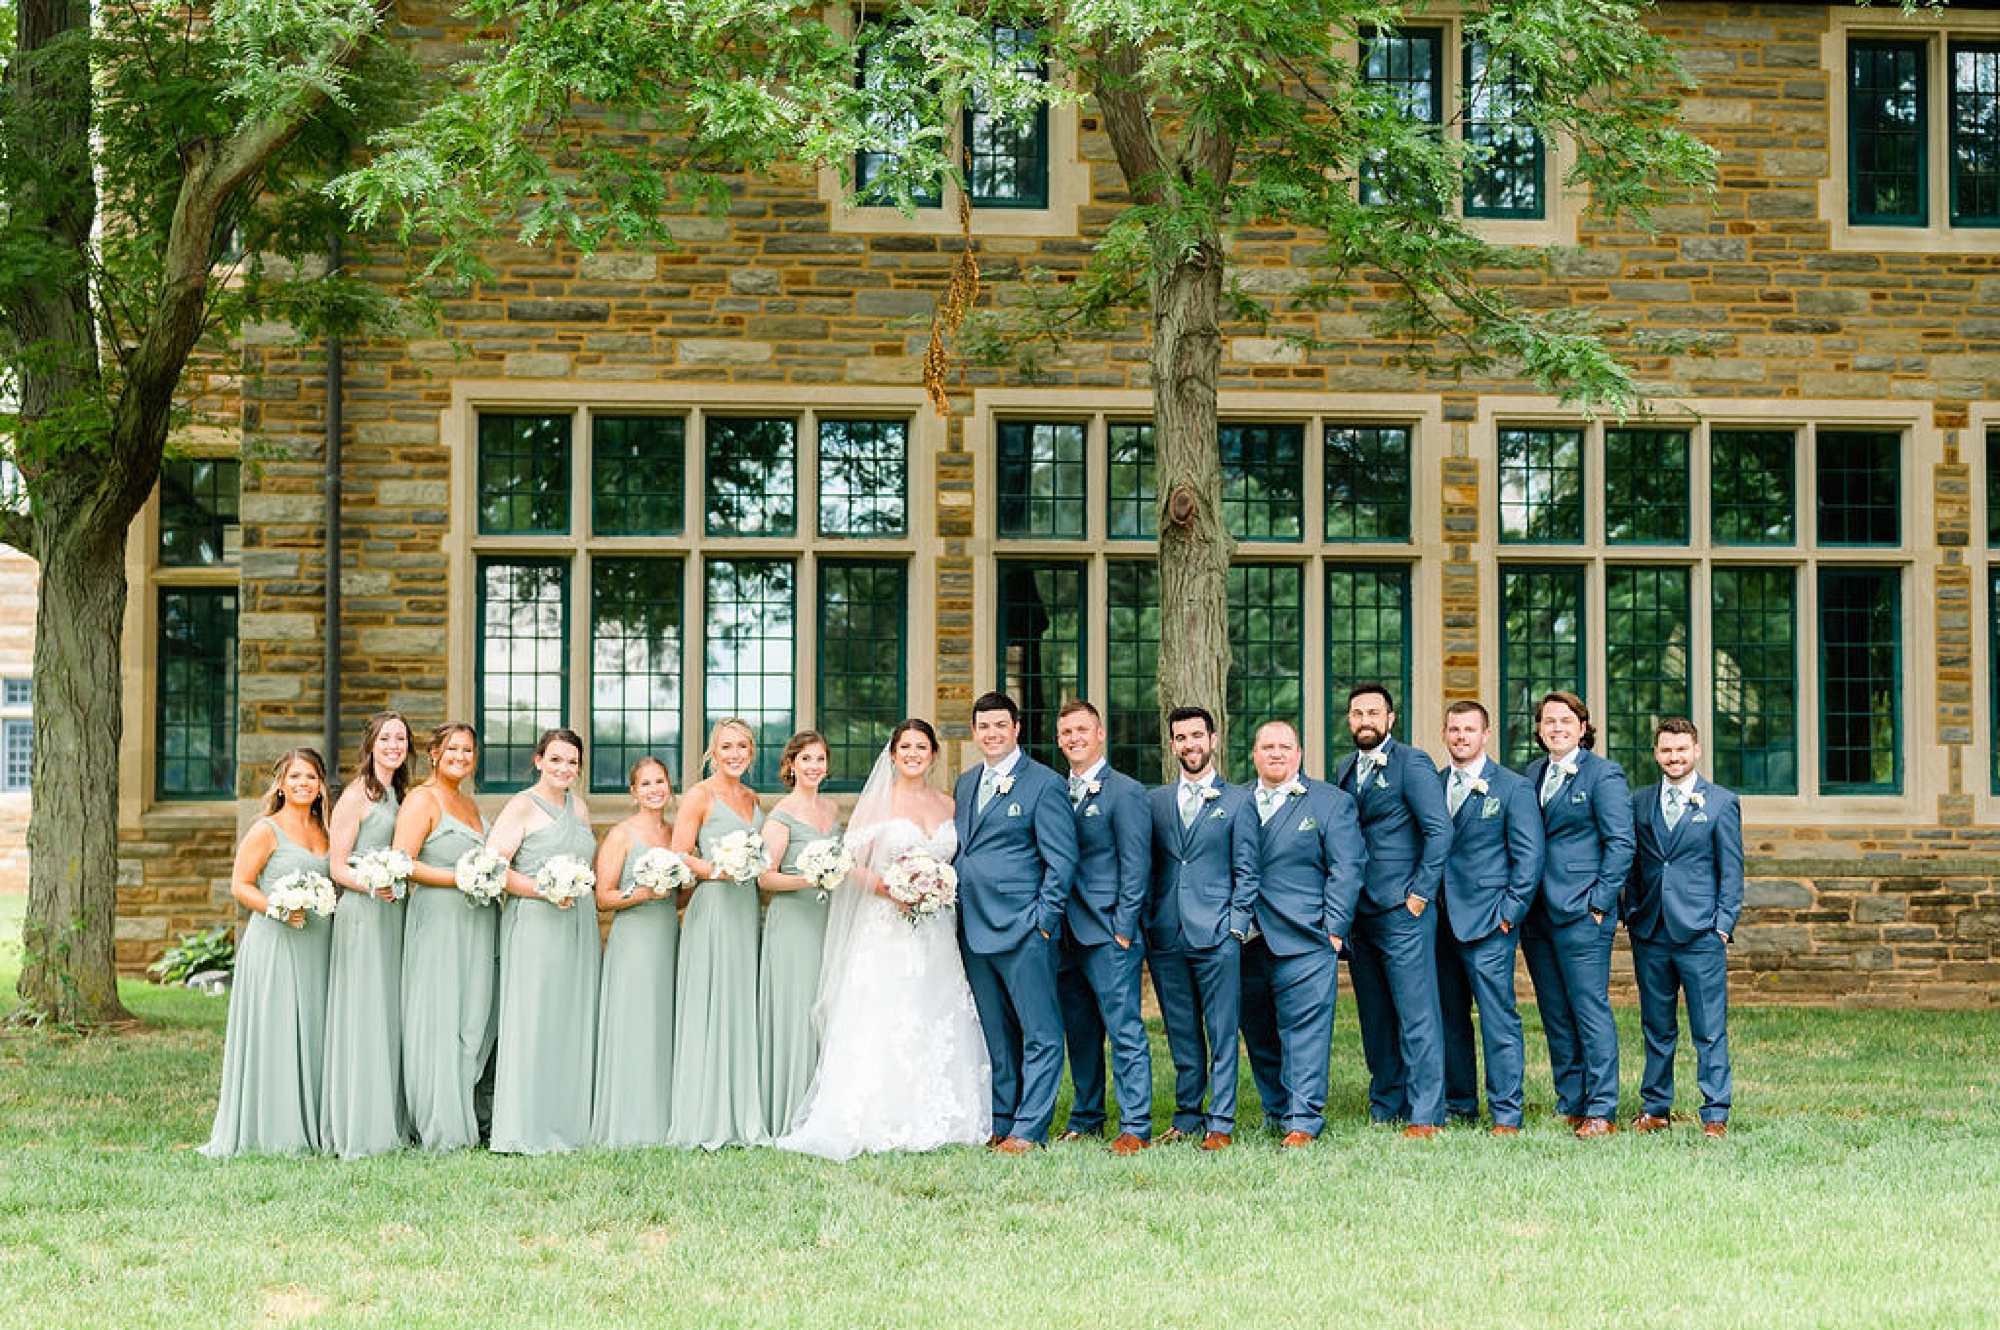 newlyweds stand with bridesmaids in sage green gowns and groomsmen in navy suits